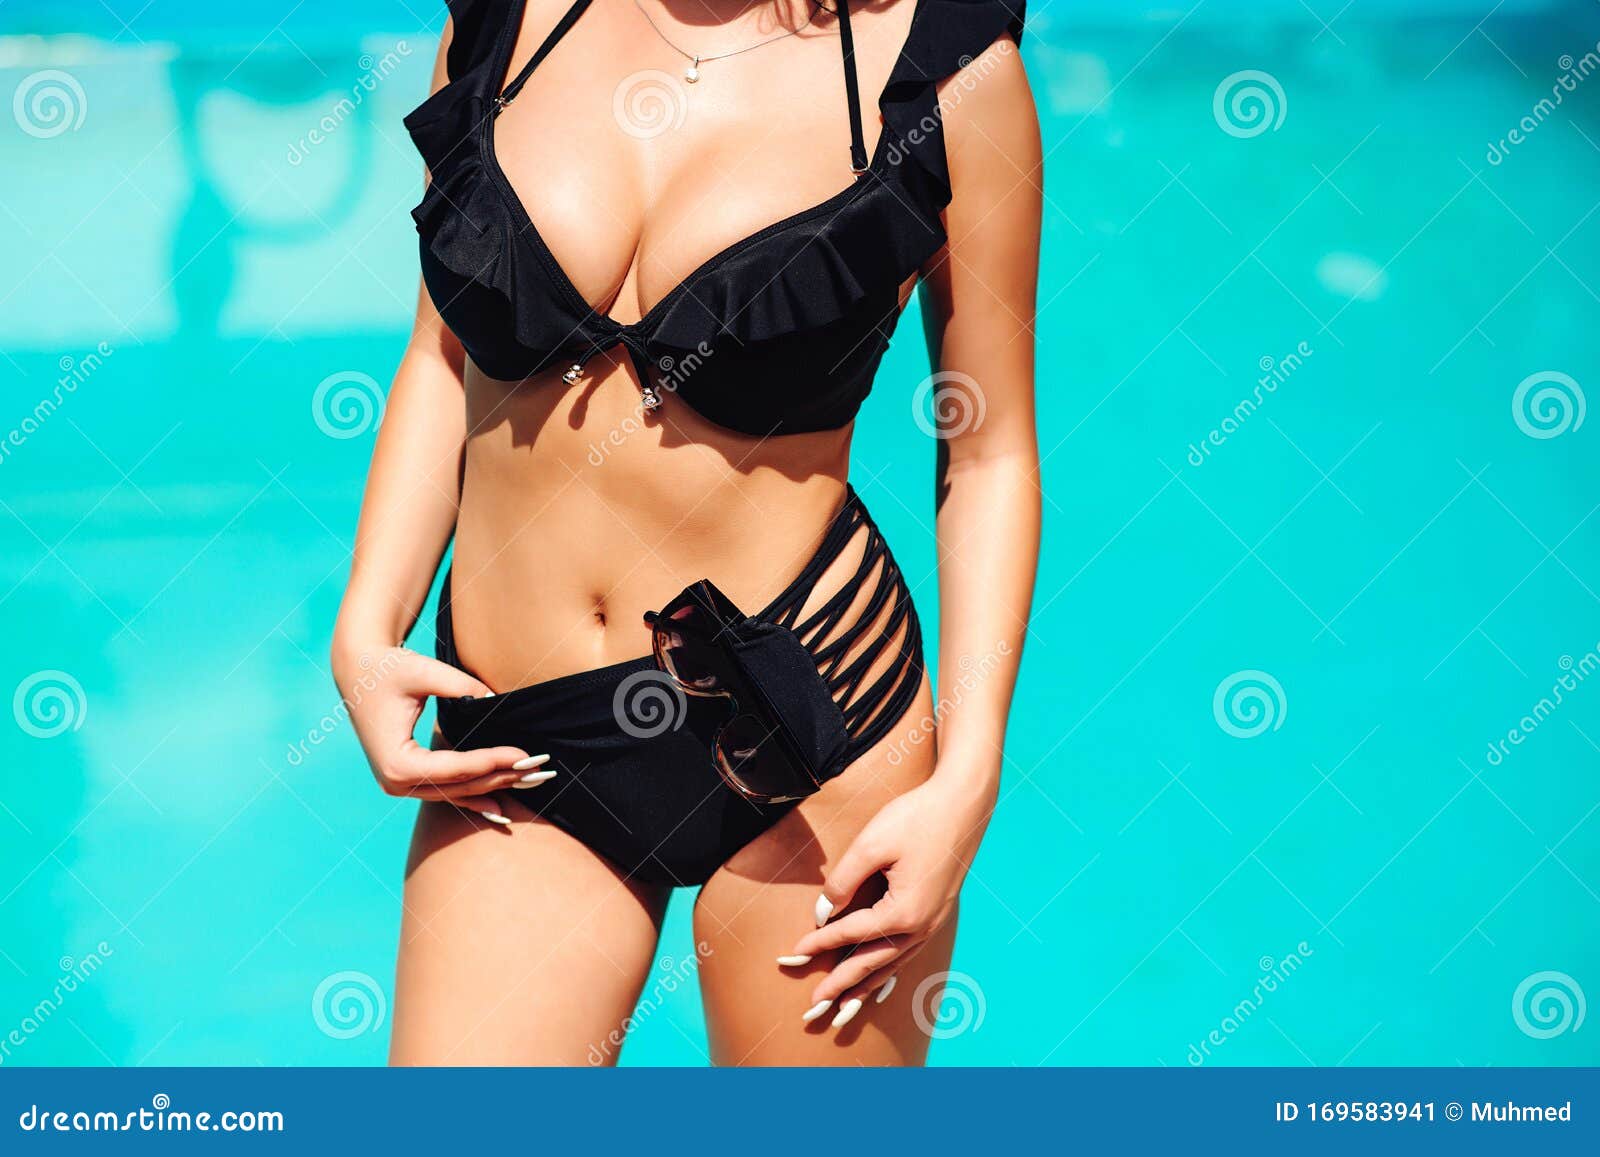 Fotografia do Stock: Sexy brunette woman with big tits in swimsuit posing  in swimming pool at hot summer. Beautiful sexy hot girl with perfect body  and big boobs posing in fashionable black